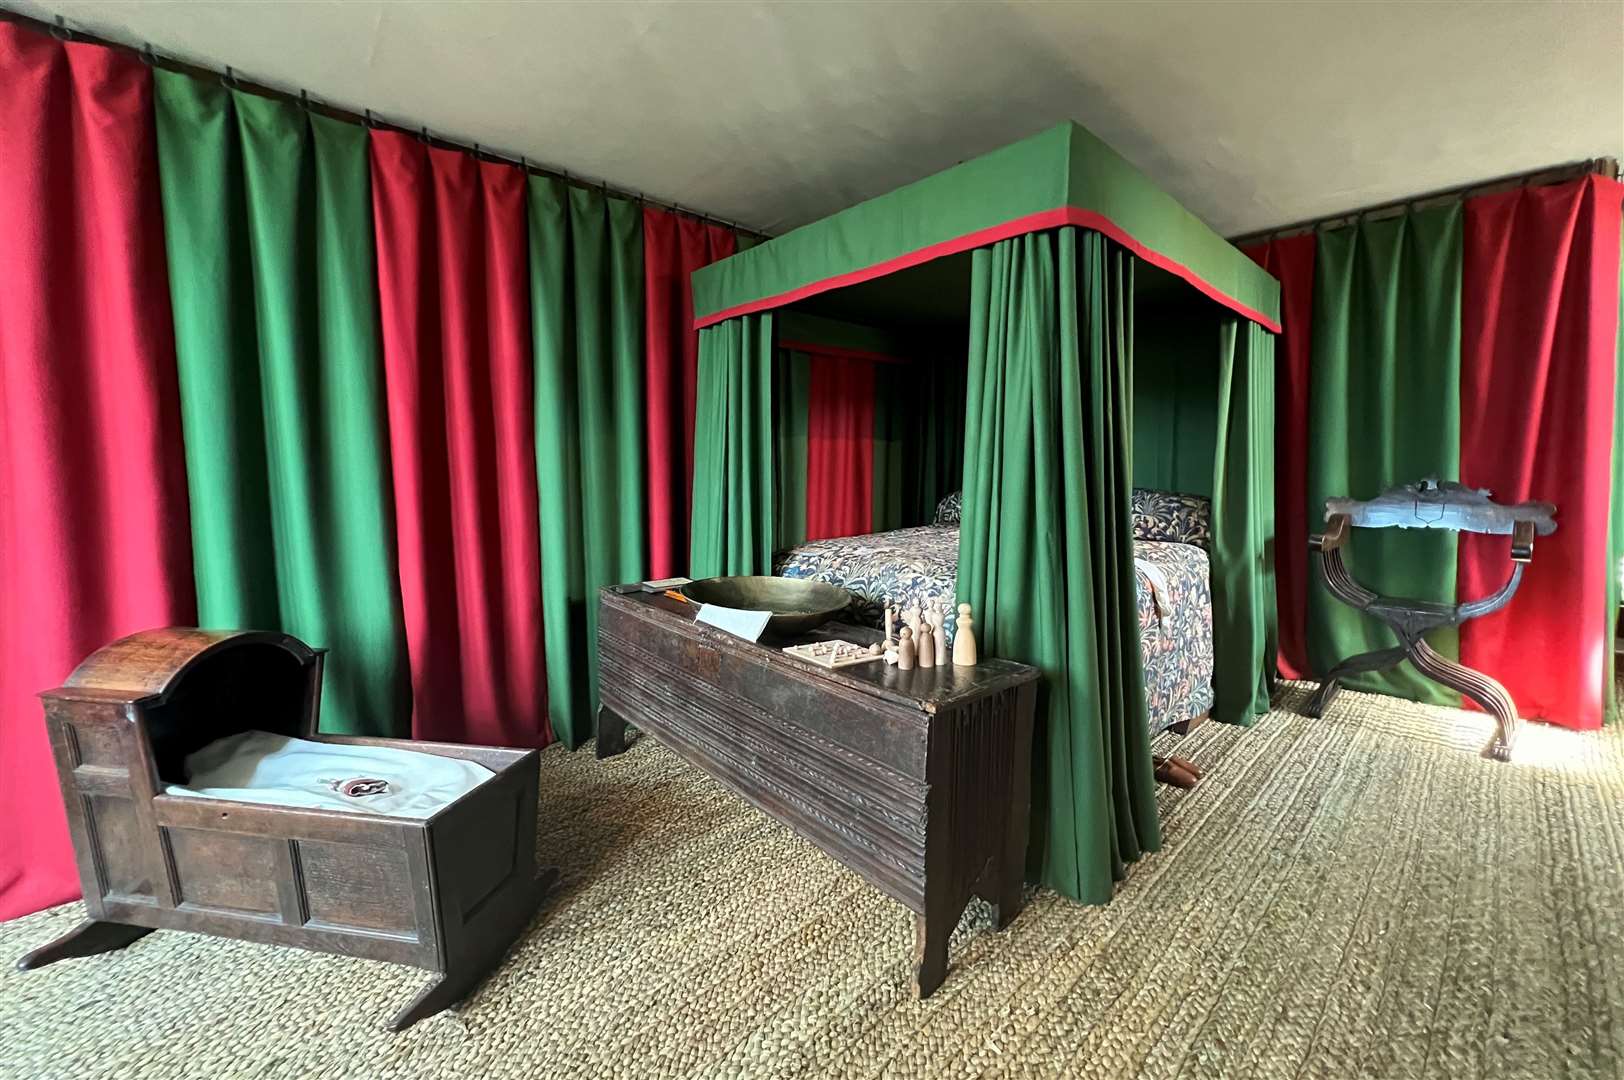 The renovations have left the rooms structurally the same as when the Tudor queen lived there with decorations to reflect what they would have looked like at the time. Picture: Hever Castle and Gardens